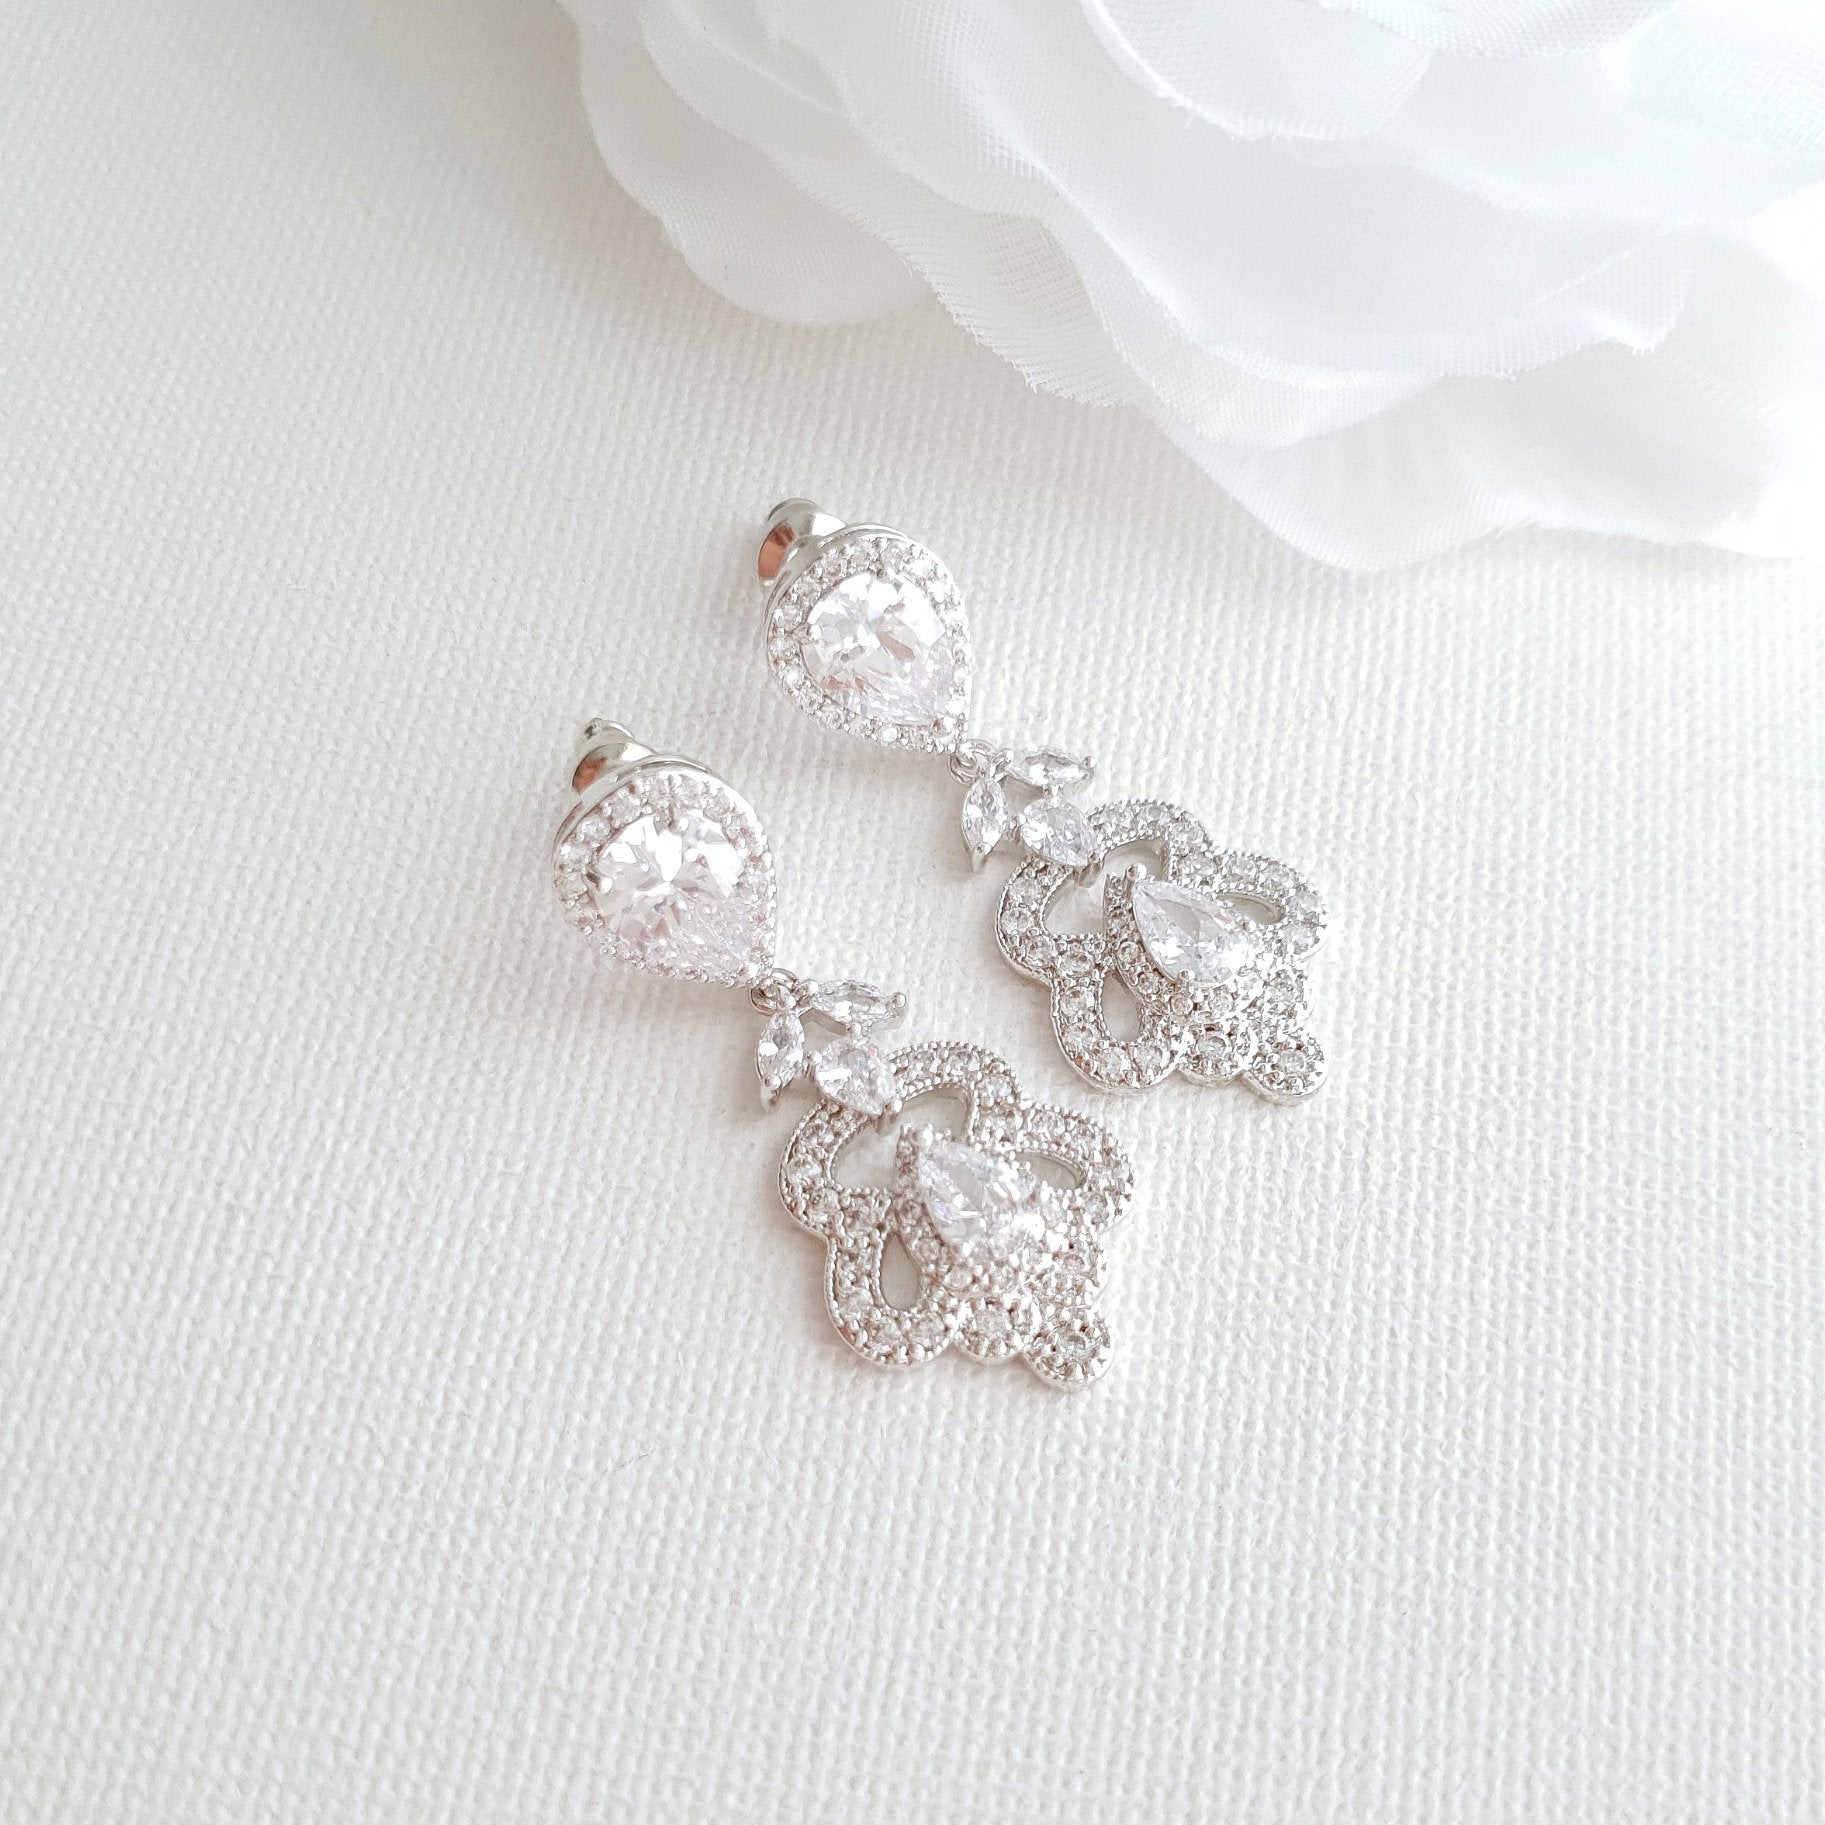 Top 50 Bridal Earring Ideas To Elevate Your Wedding Look